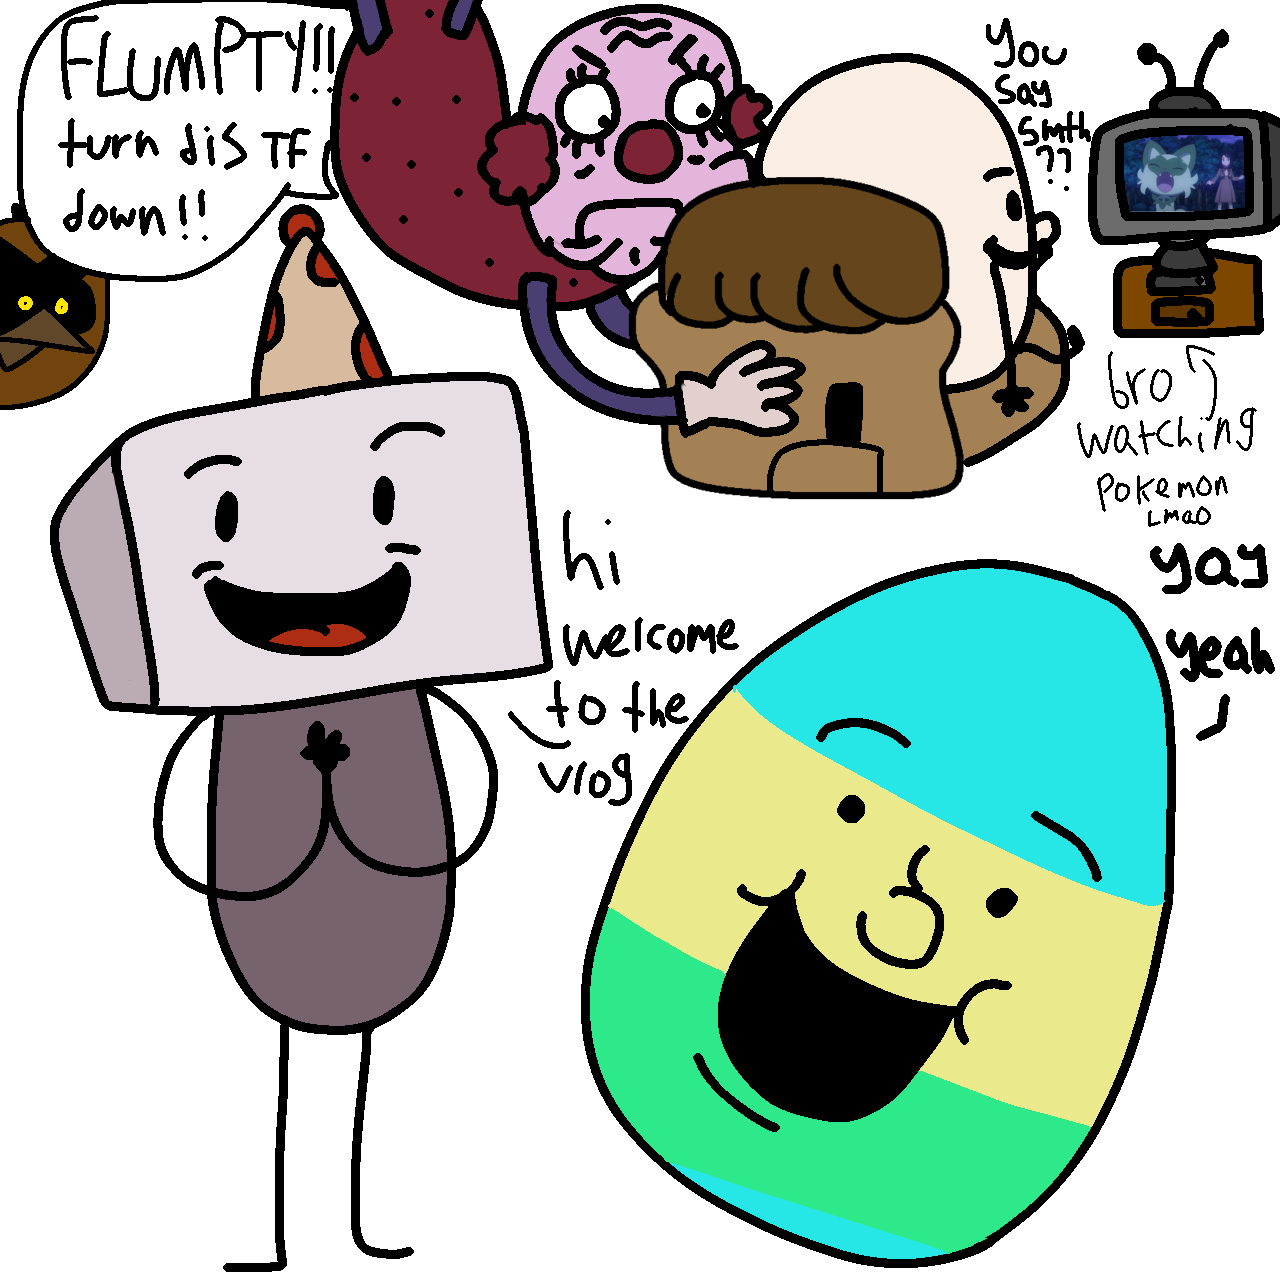 One night at Flumpty's 2 (my version/old art) by Chickie456 on DeviantArt